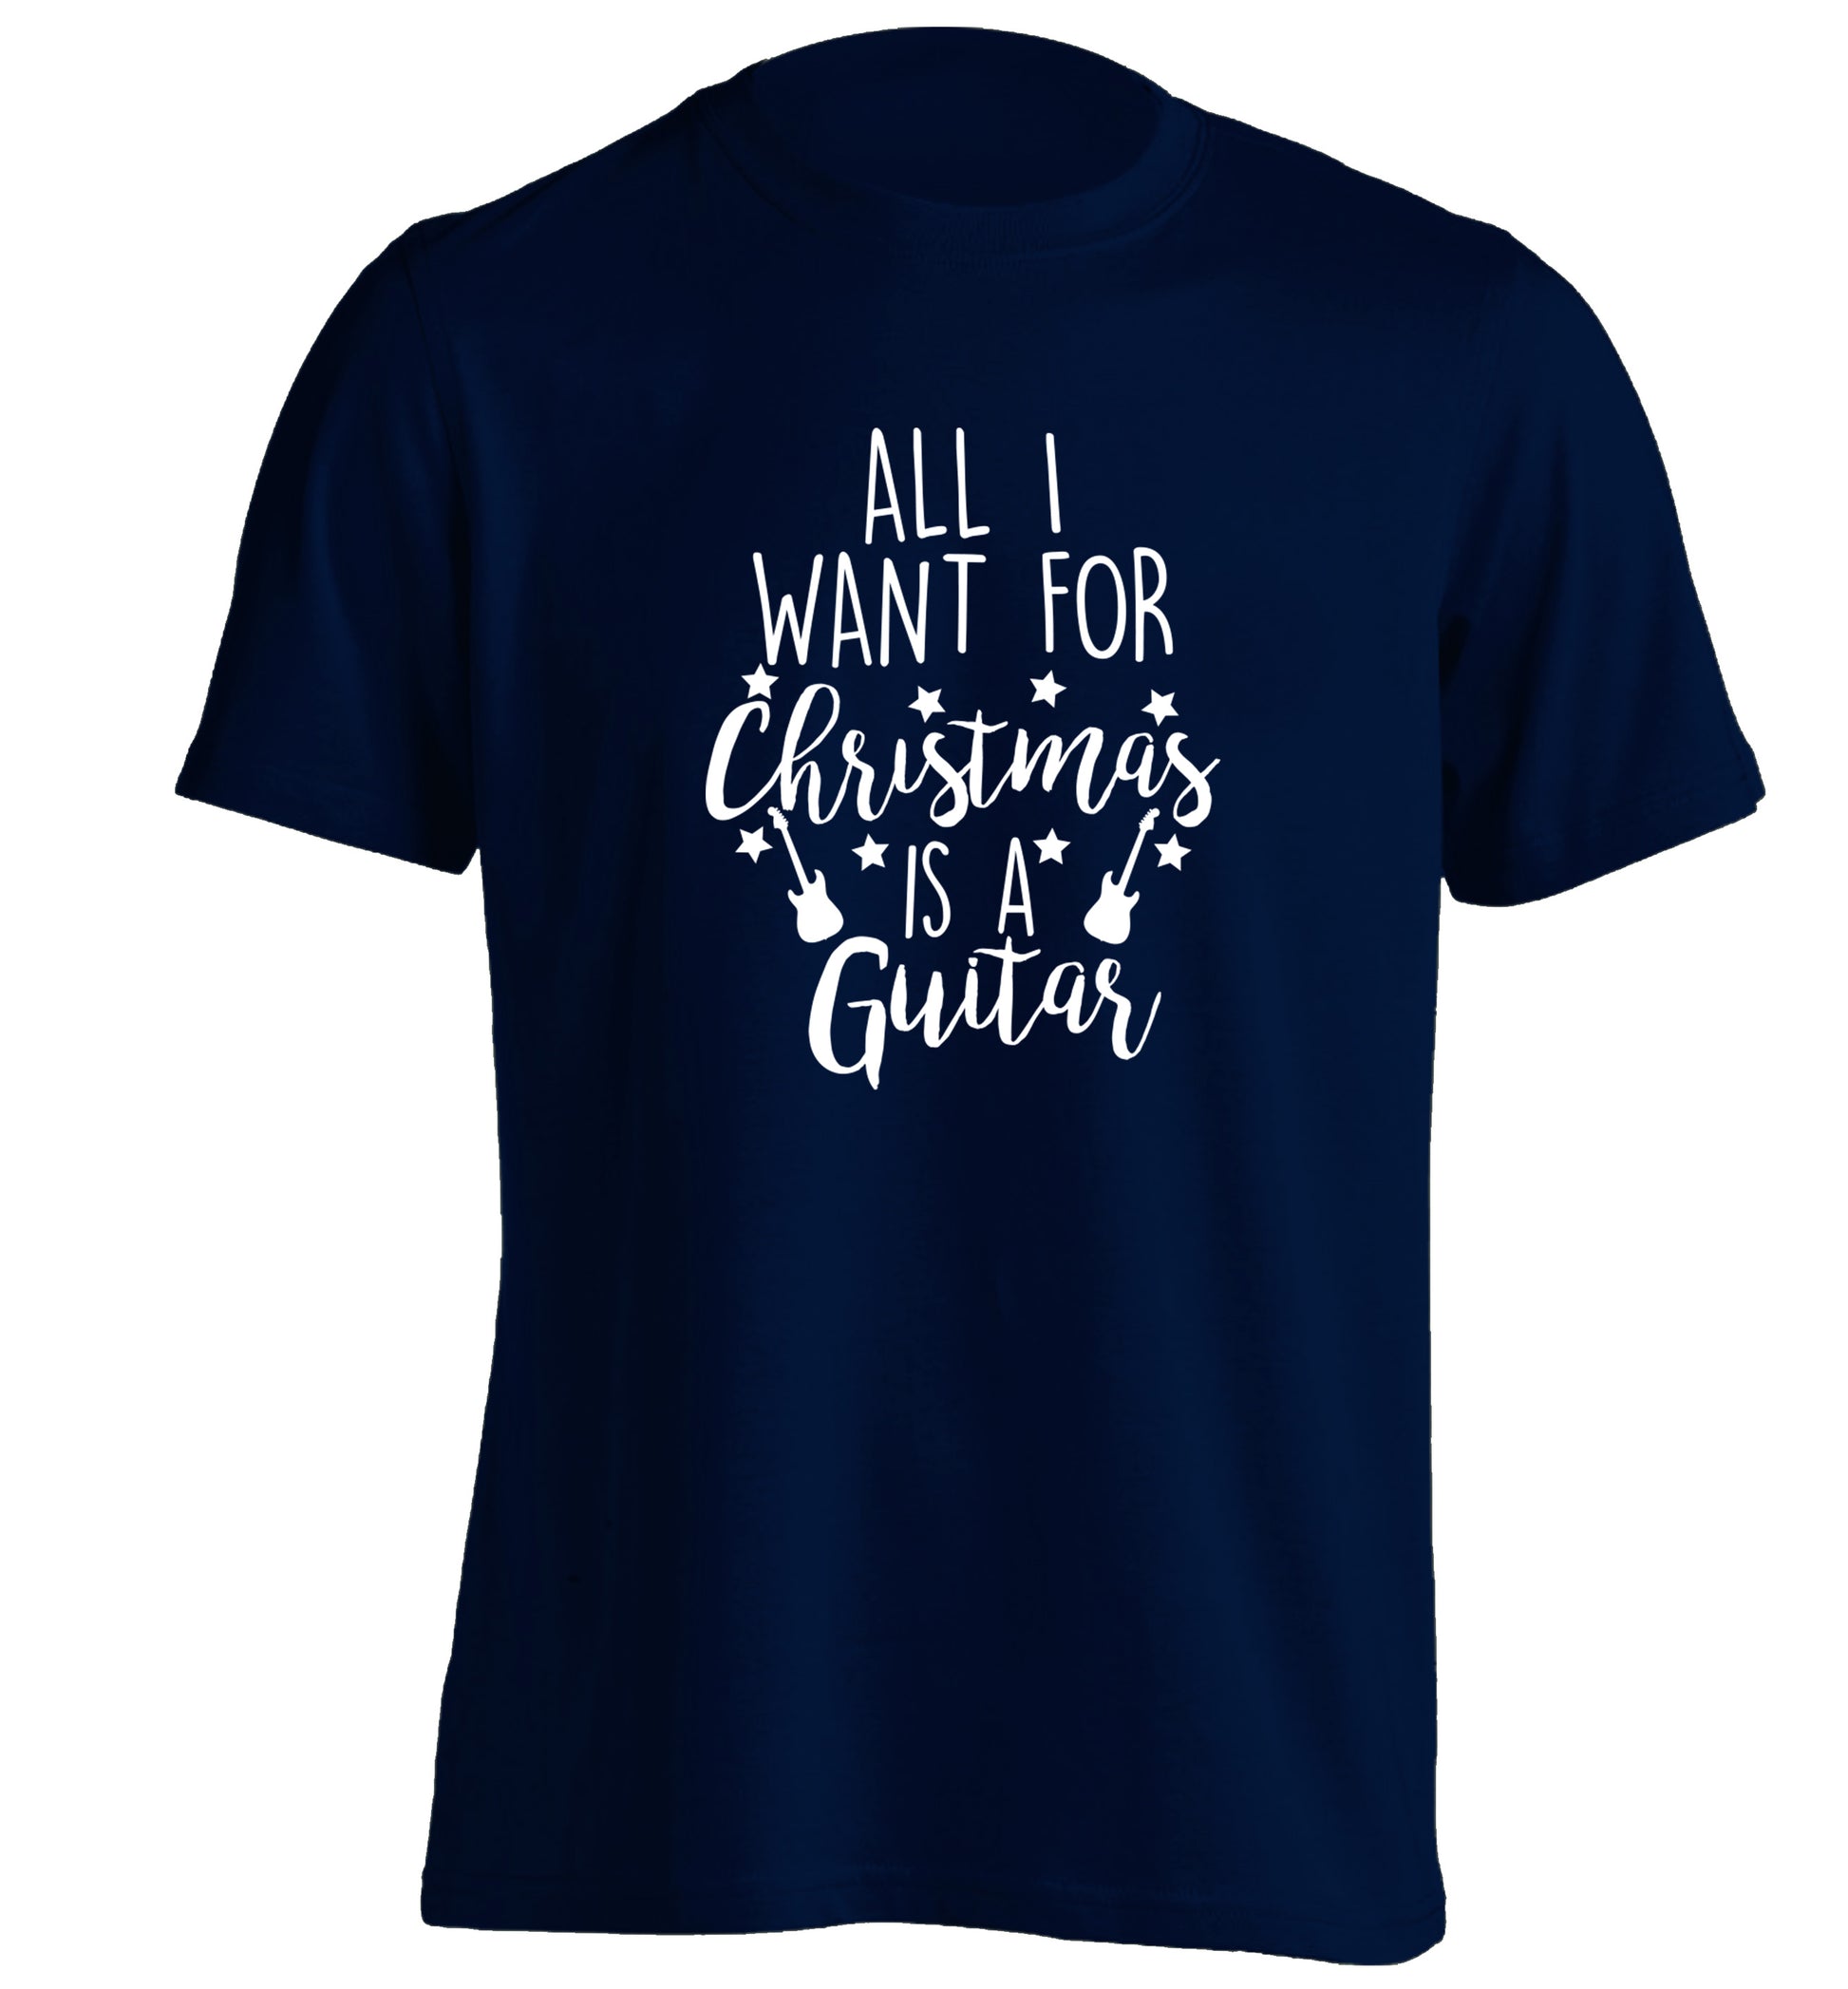 All I want for Christmas is a guitar adults unisex navy Tshirt 2XL